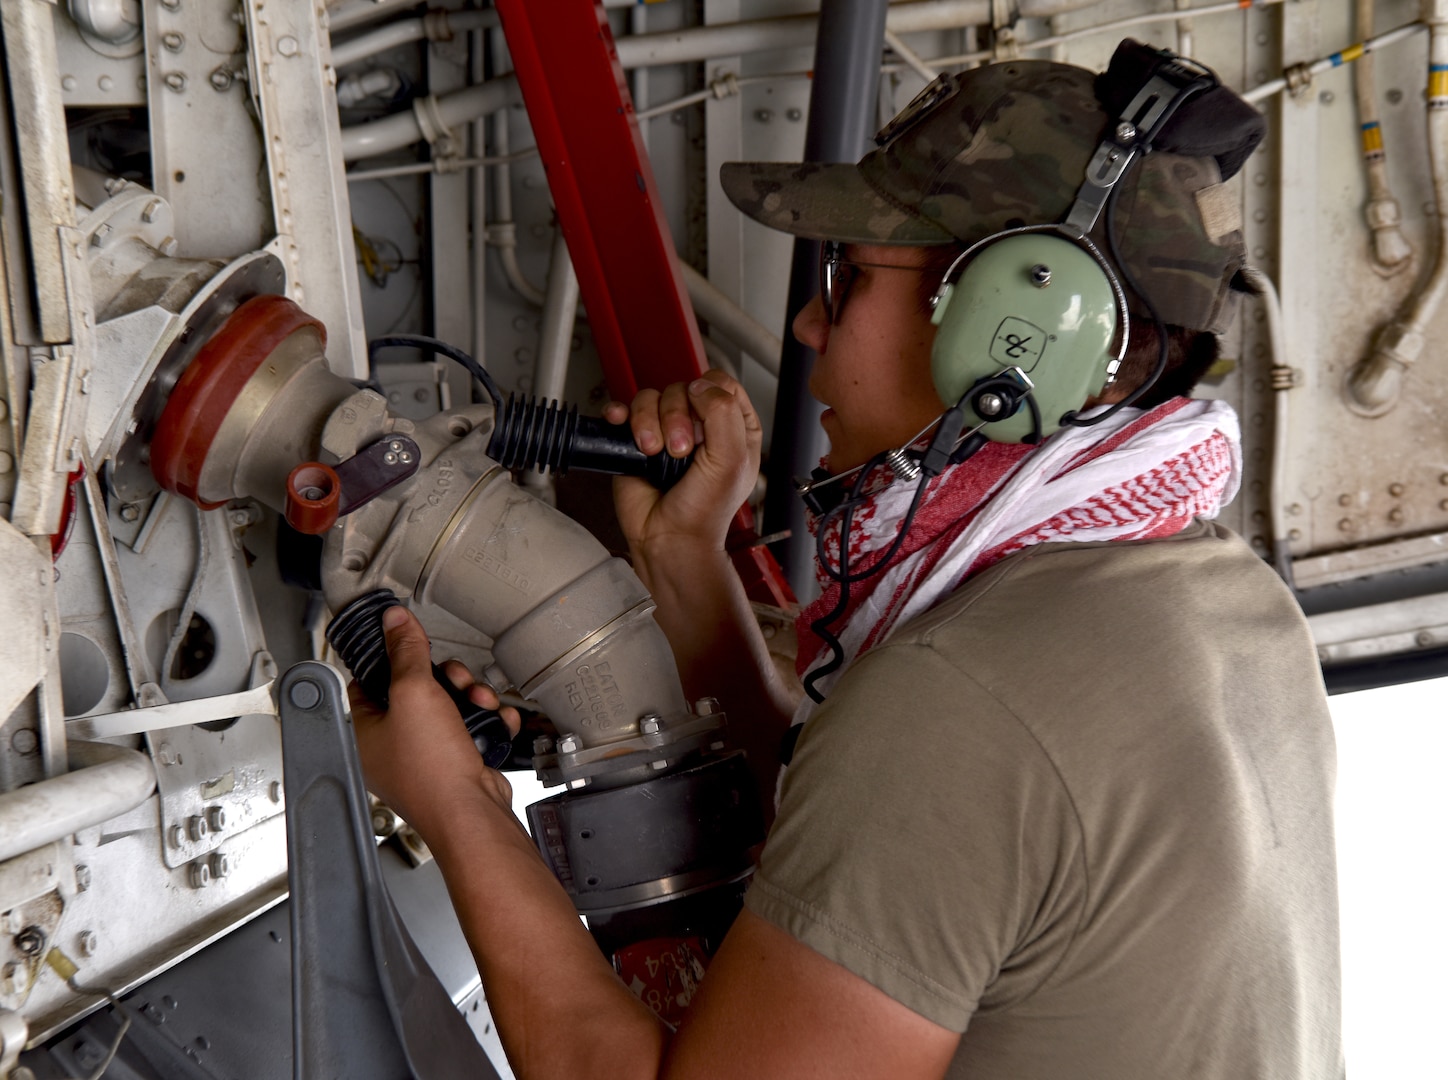 The 378th Expeditionary Logistic Readiness Squadron rapidly refuel a KC-135 Stratotanker from the 23rd Expeditionary Refueling Squadron from Al Udeid Air Base, Qatar at Prince Sultan Air Base, Kingdom of Saudi Arabia, July 13, 2020.